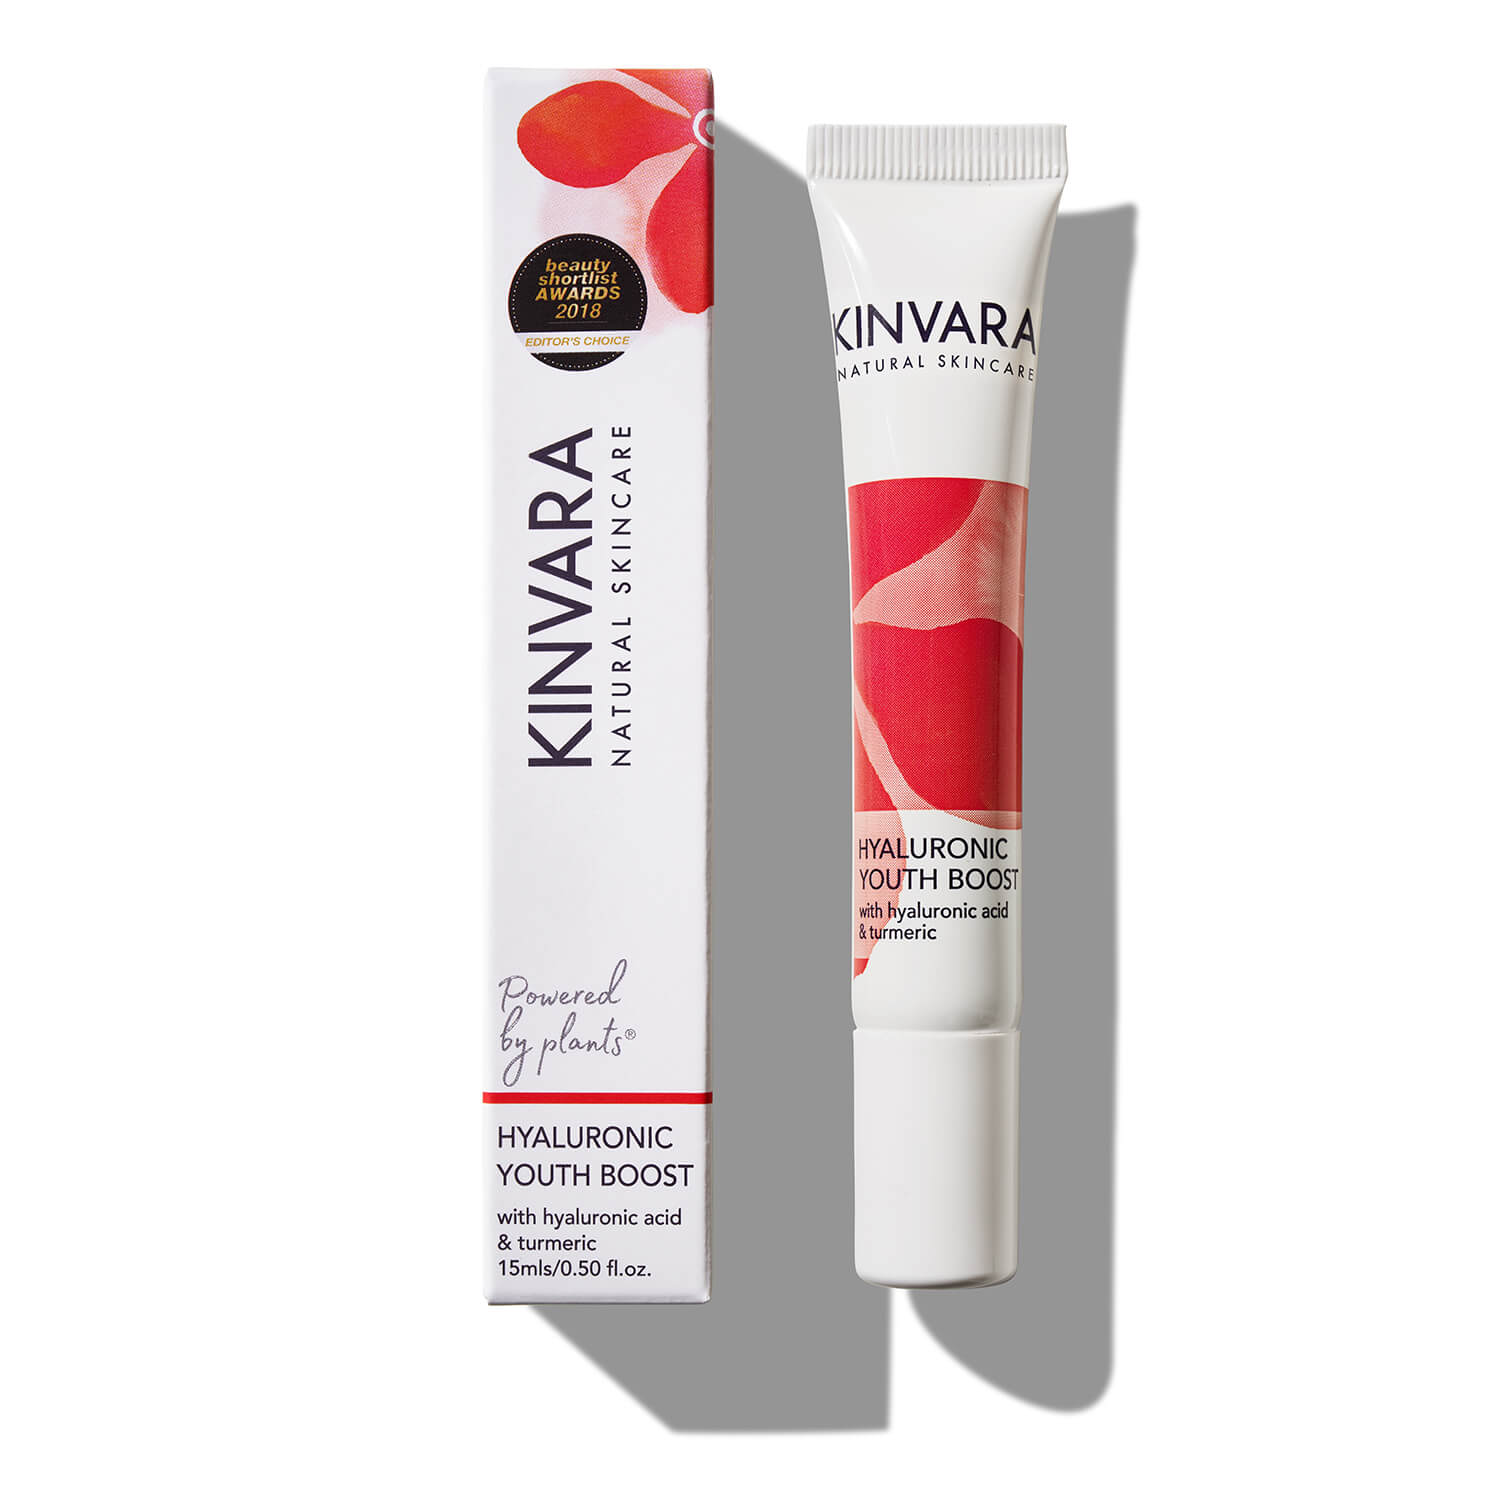 Kinvara Hyaluronic Youth Boost - 15ml 1 Shaws Department Stores